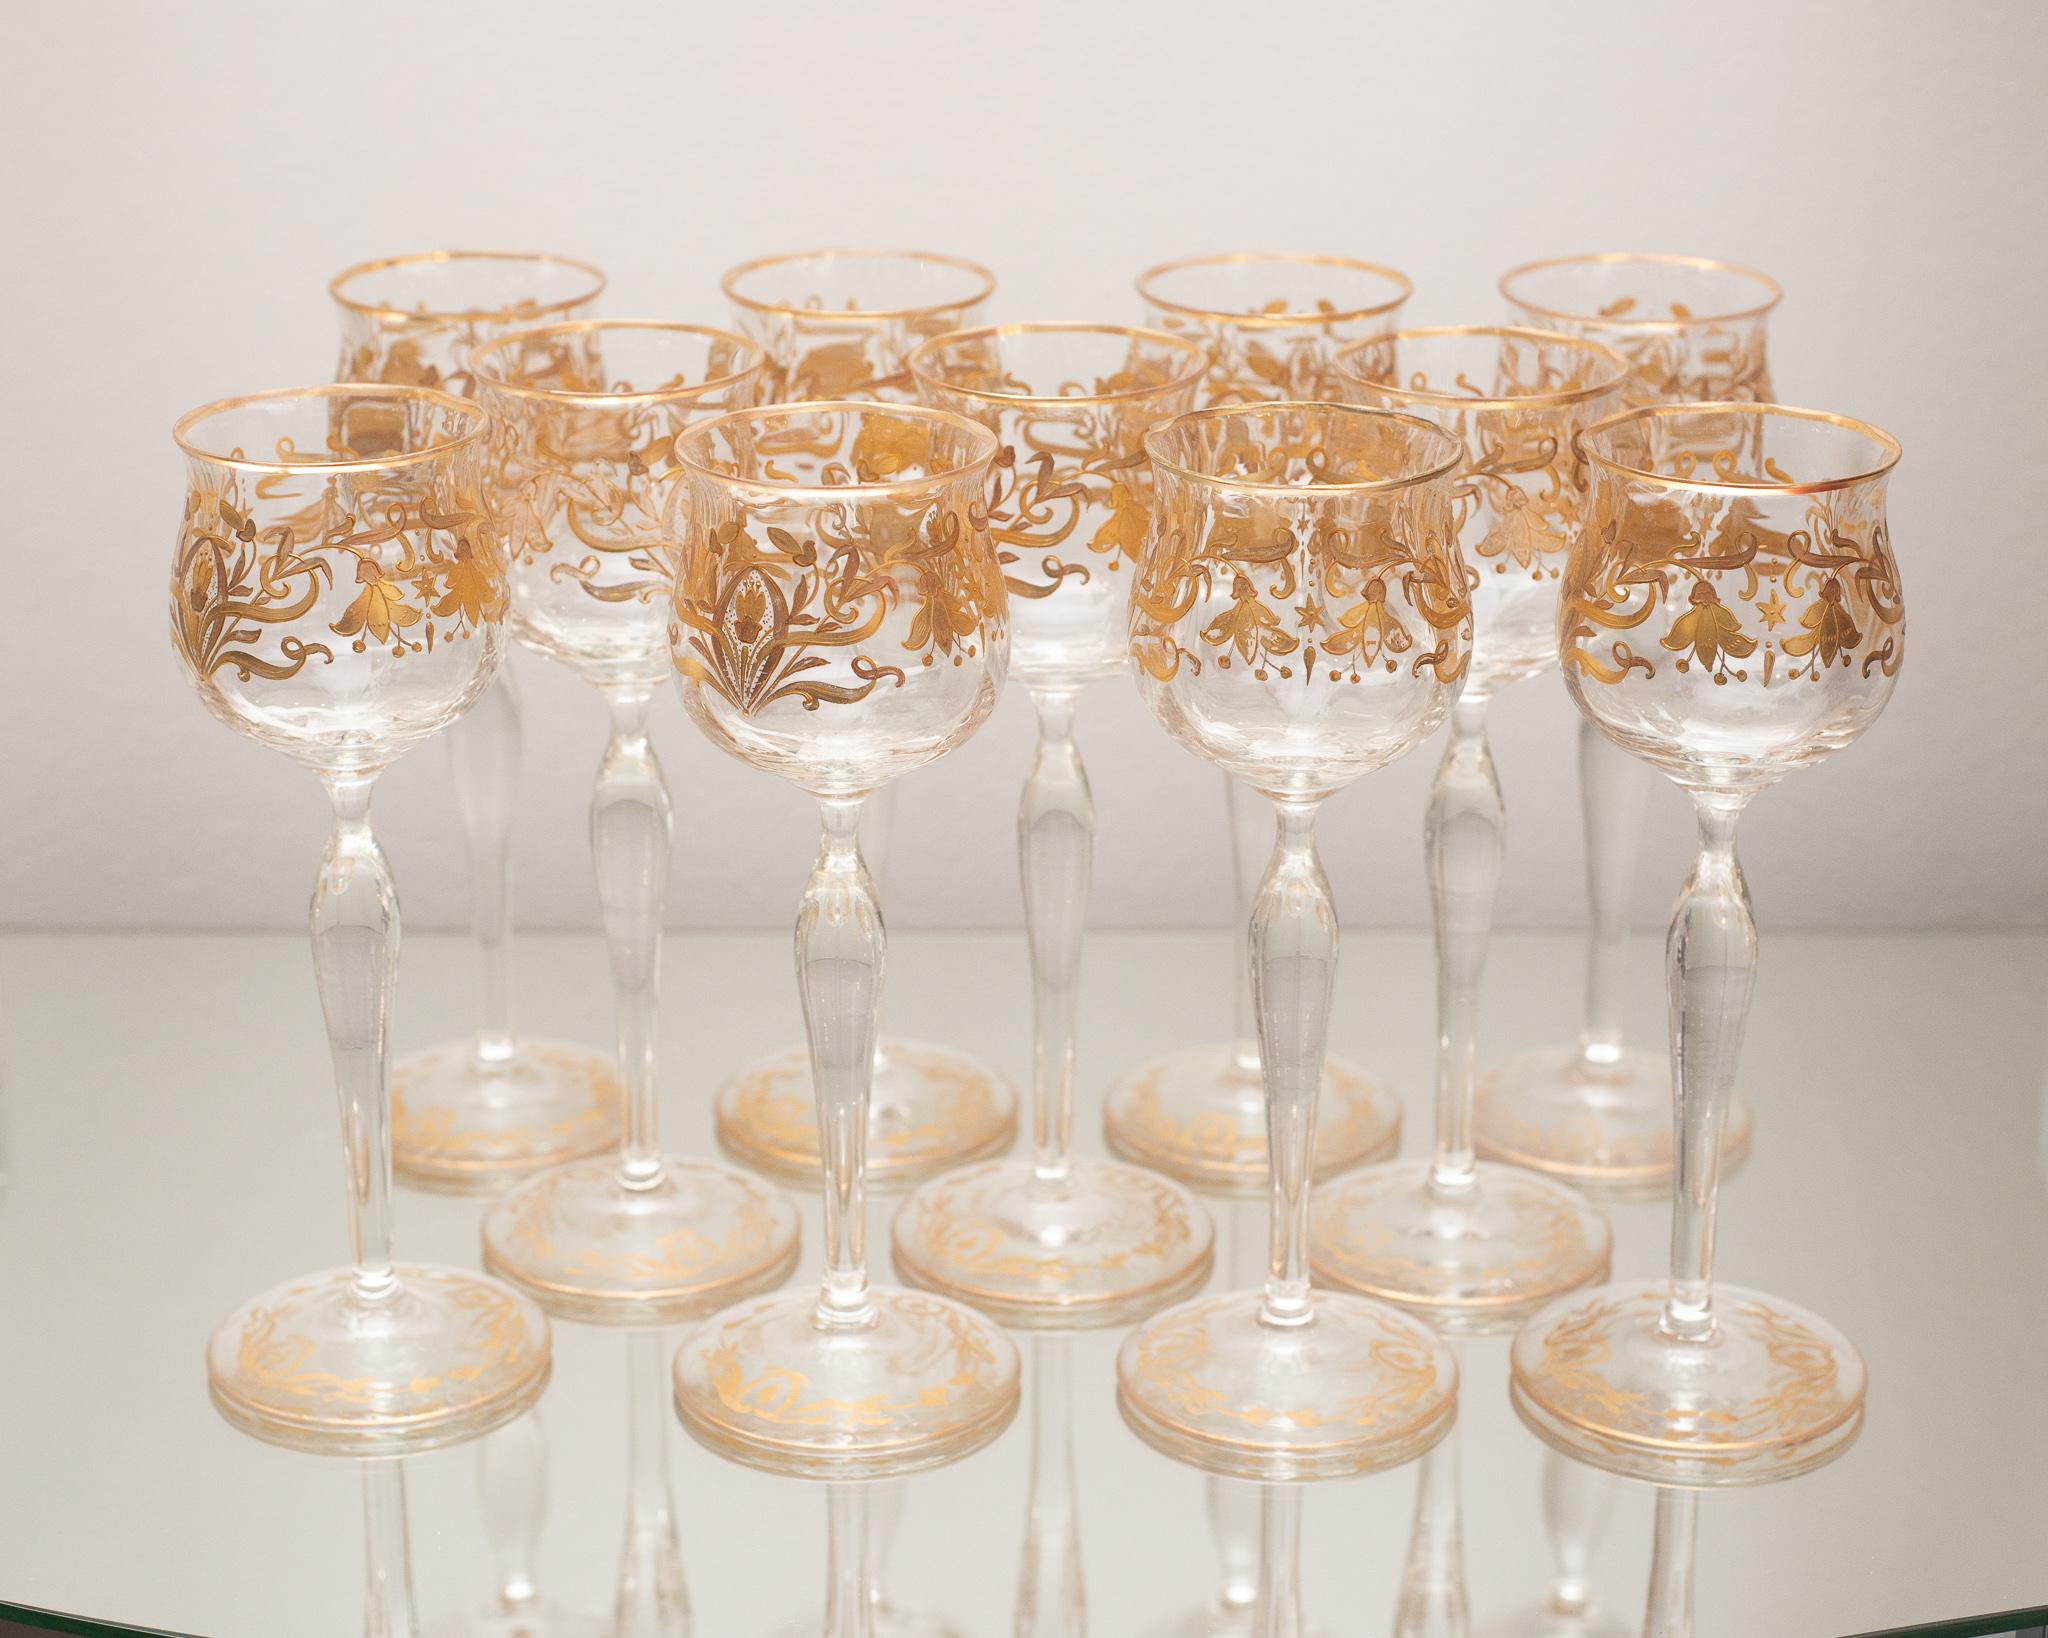 An exquisite set of 10 antique Venetian wine glasses with gold leaf gilded detail. Both rare and difficult to source in complete sets, these wine glasses are smaller than their contemporary glasses of today, typical of barware at the turn of the